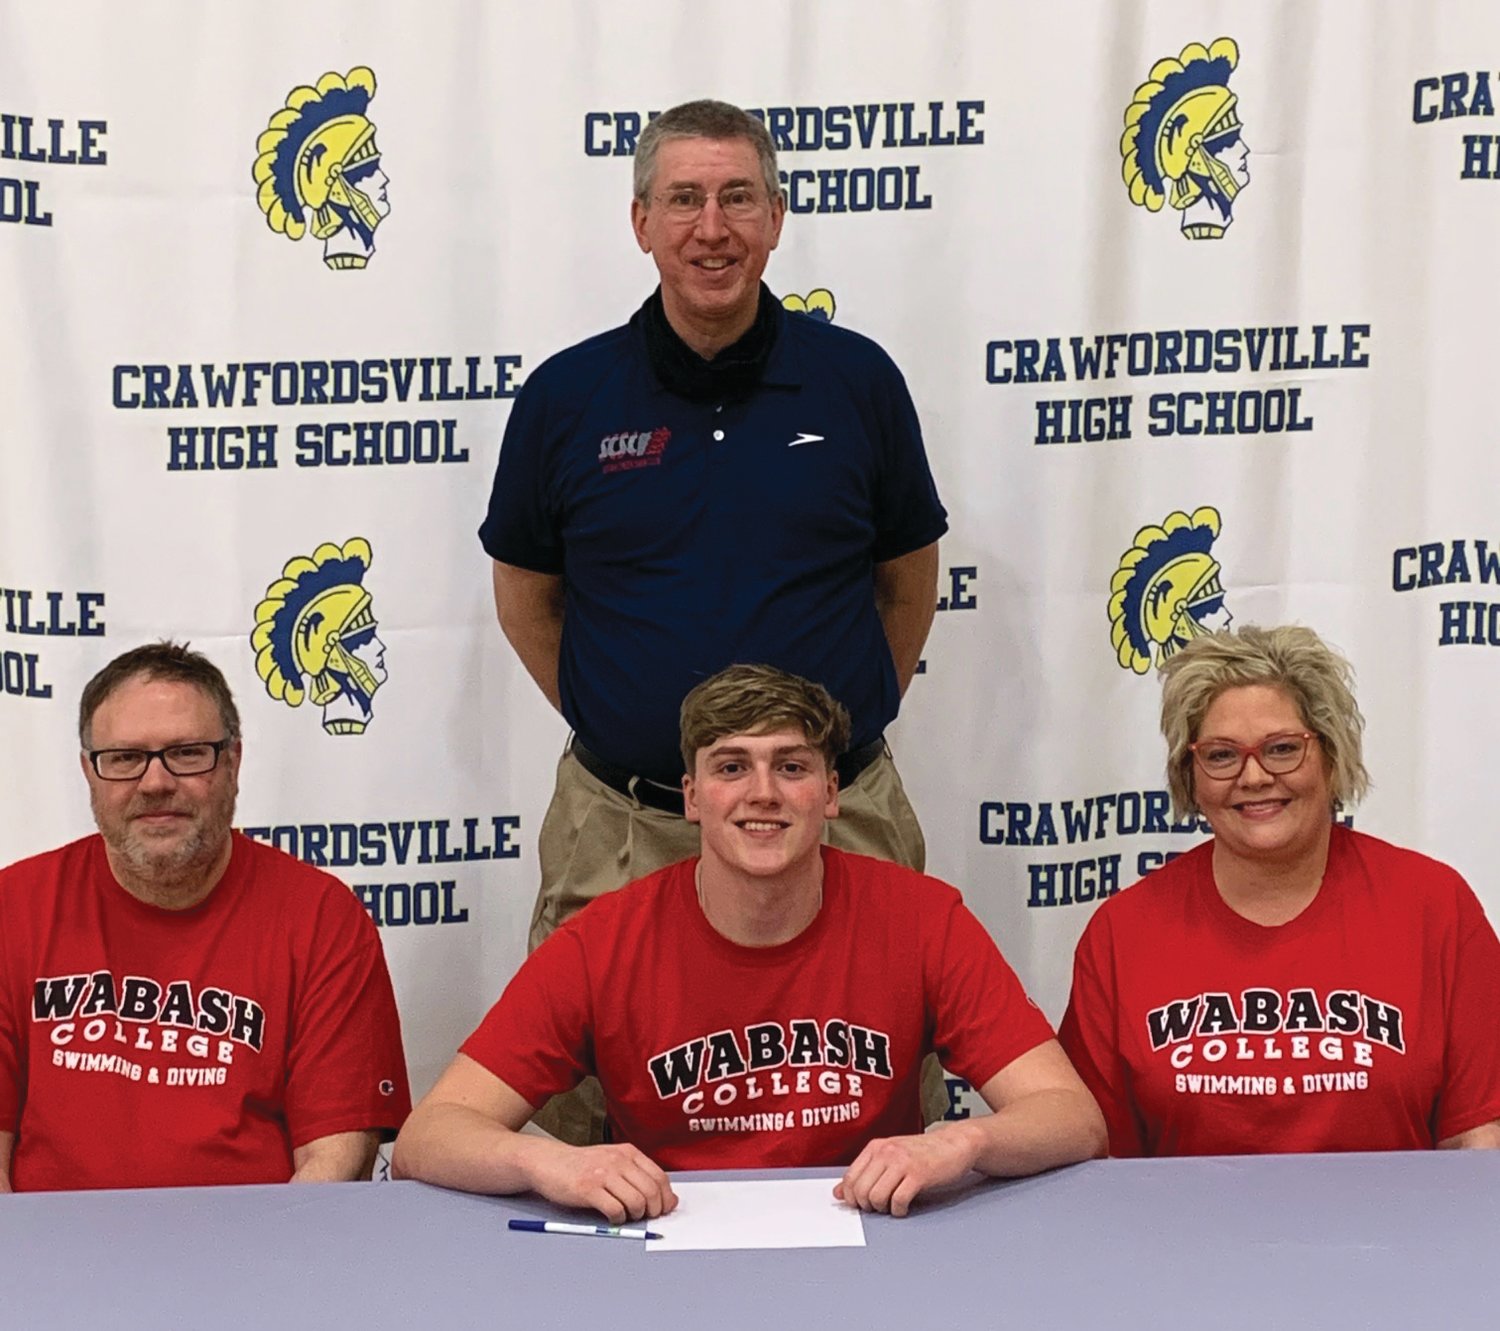 Crawfordsville senior Jack Pendleton will continue his swimming career at Wabash College. PICTURED: Jack Pendleton and parents Mike and JeneAnne Pendleton with Crawfordsville swim coach Kevin Hedrick.